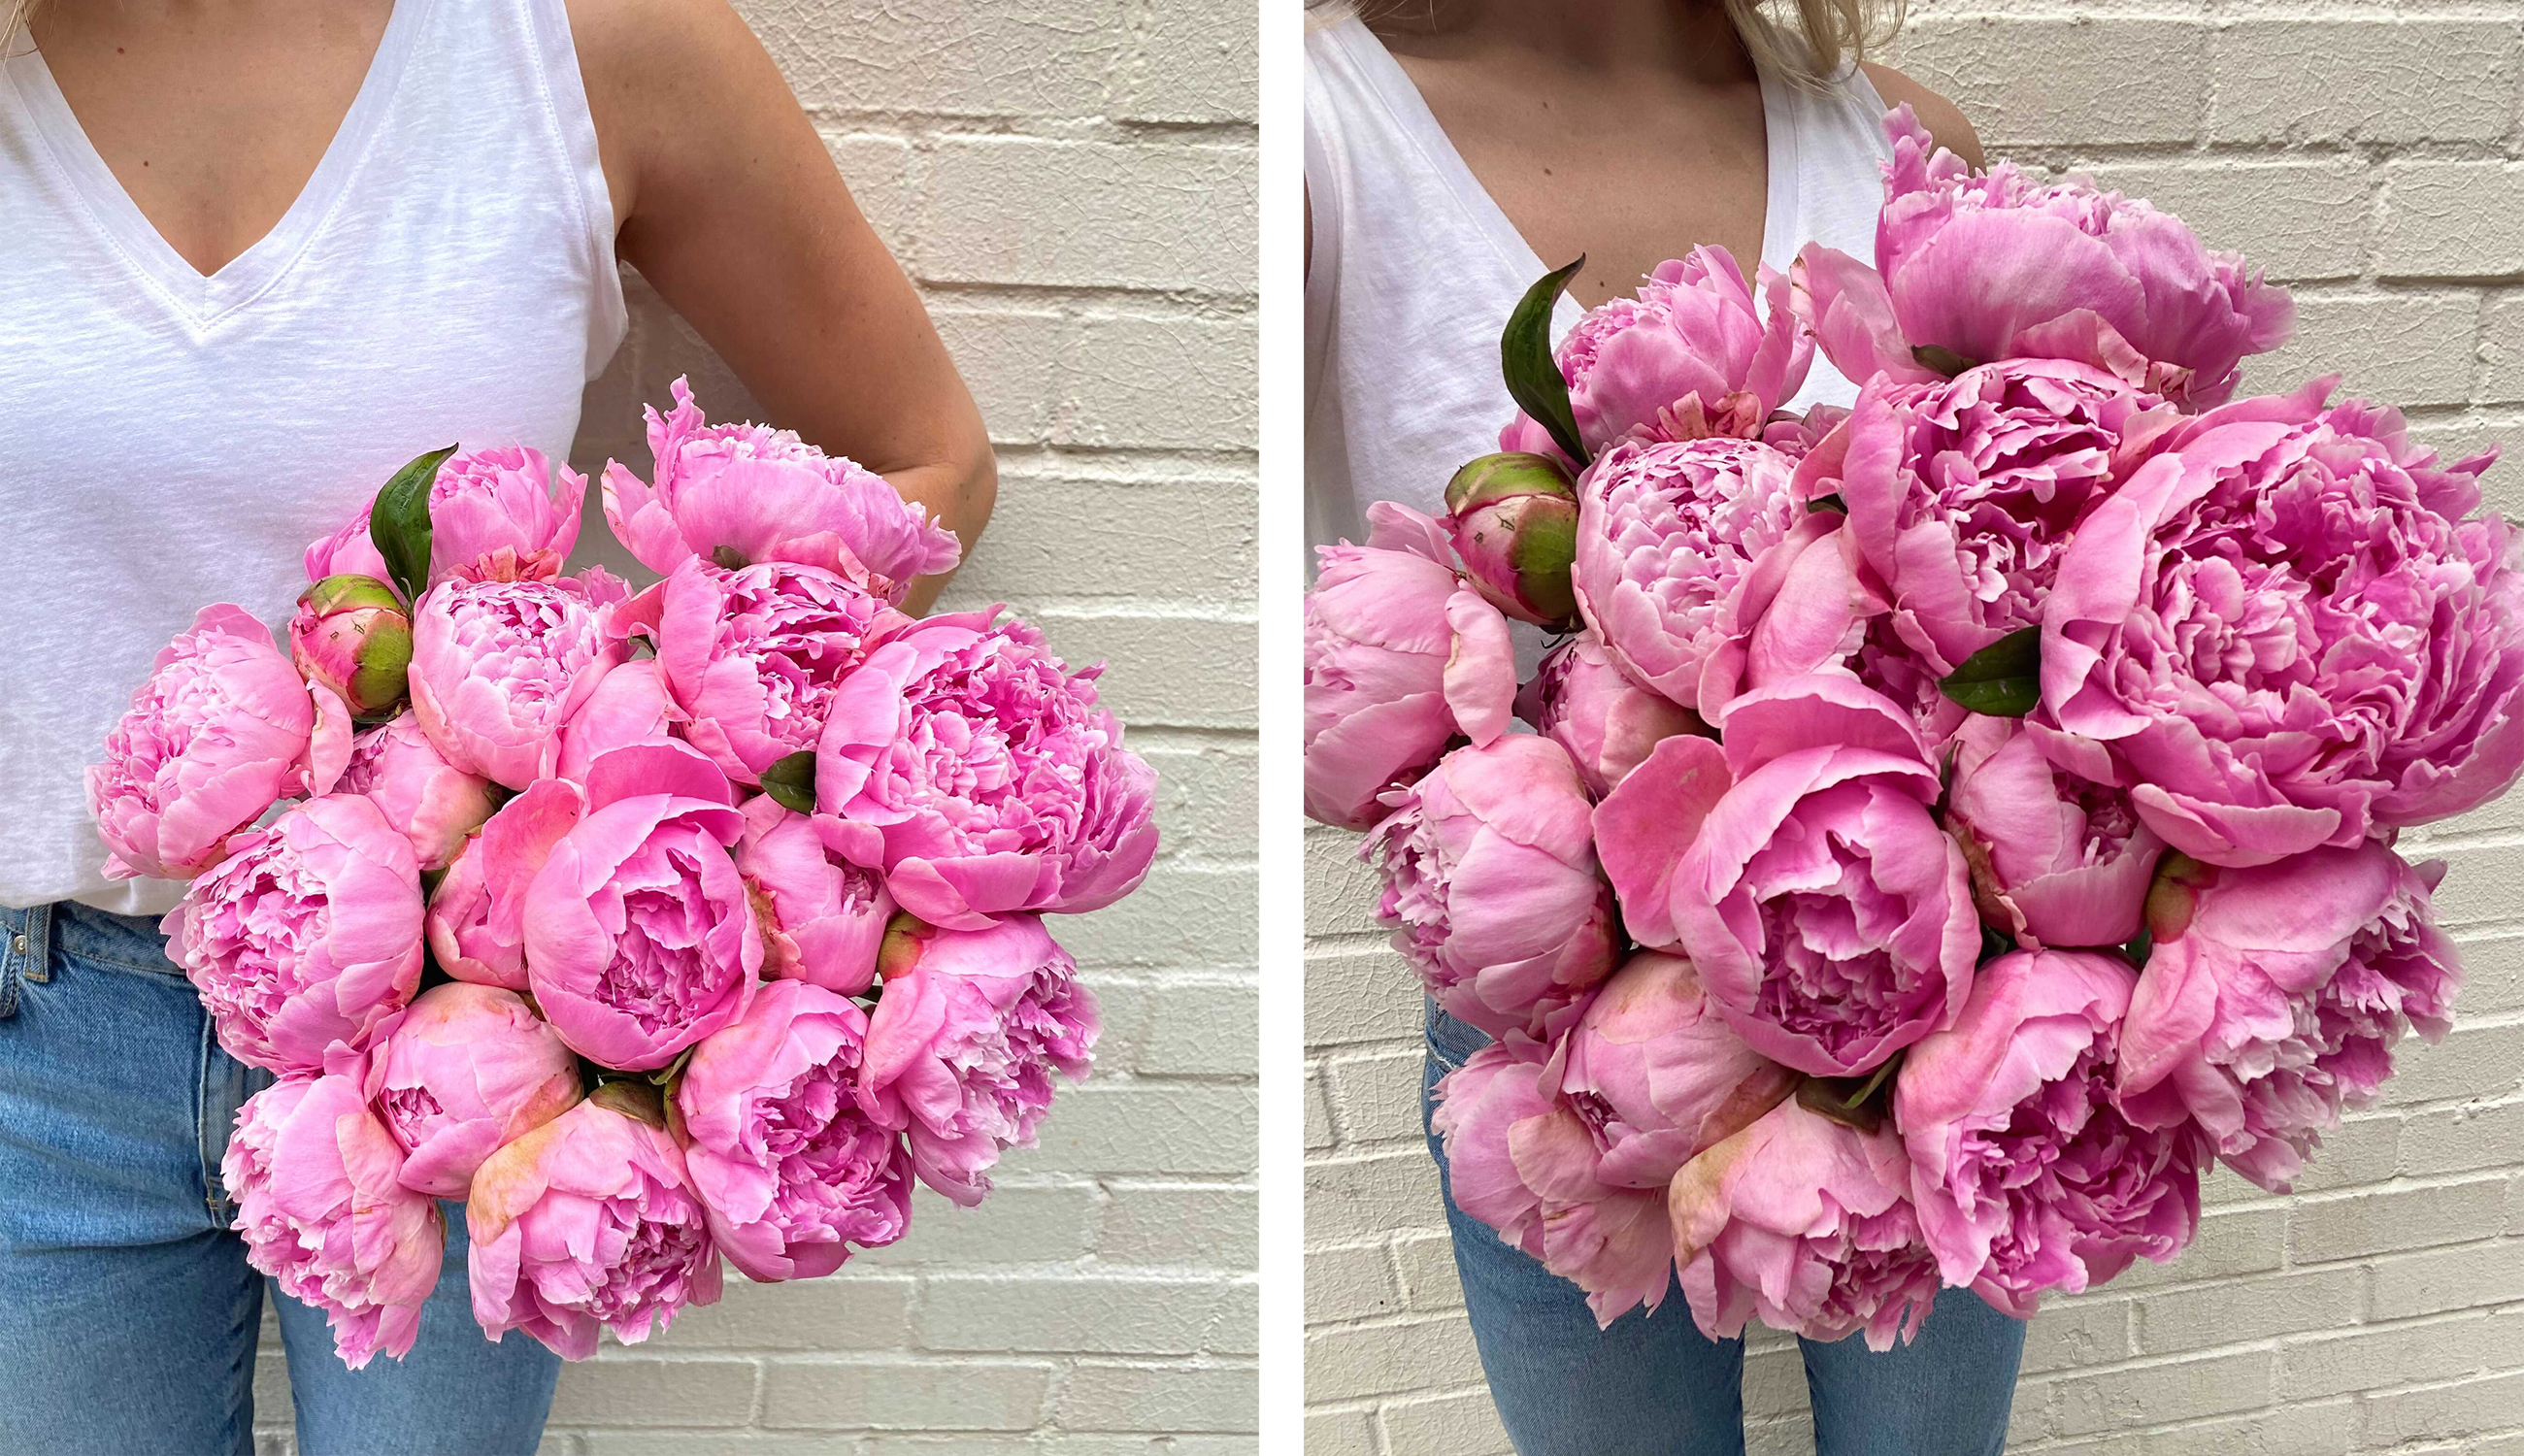 Woman holding a large bouquet of pink peony flowers.